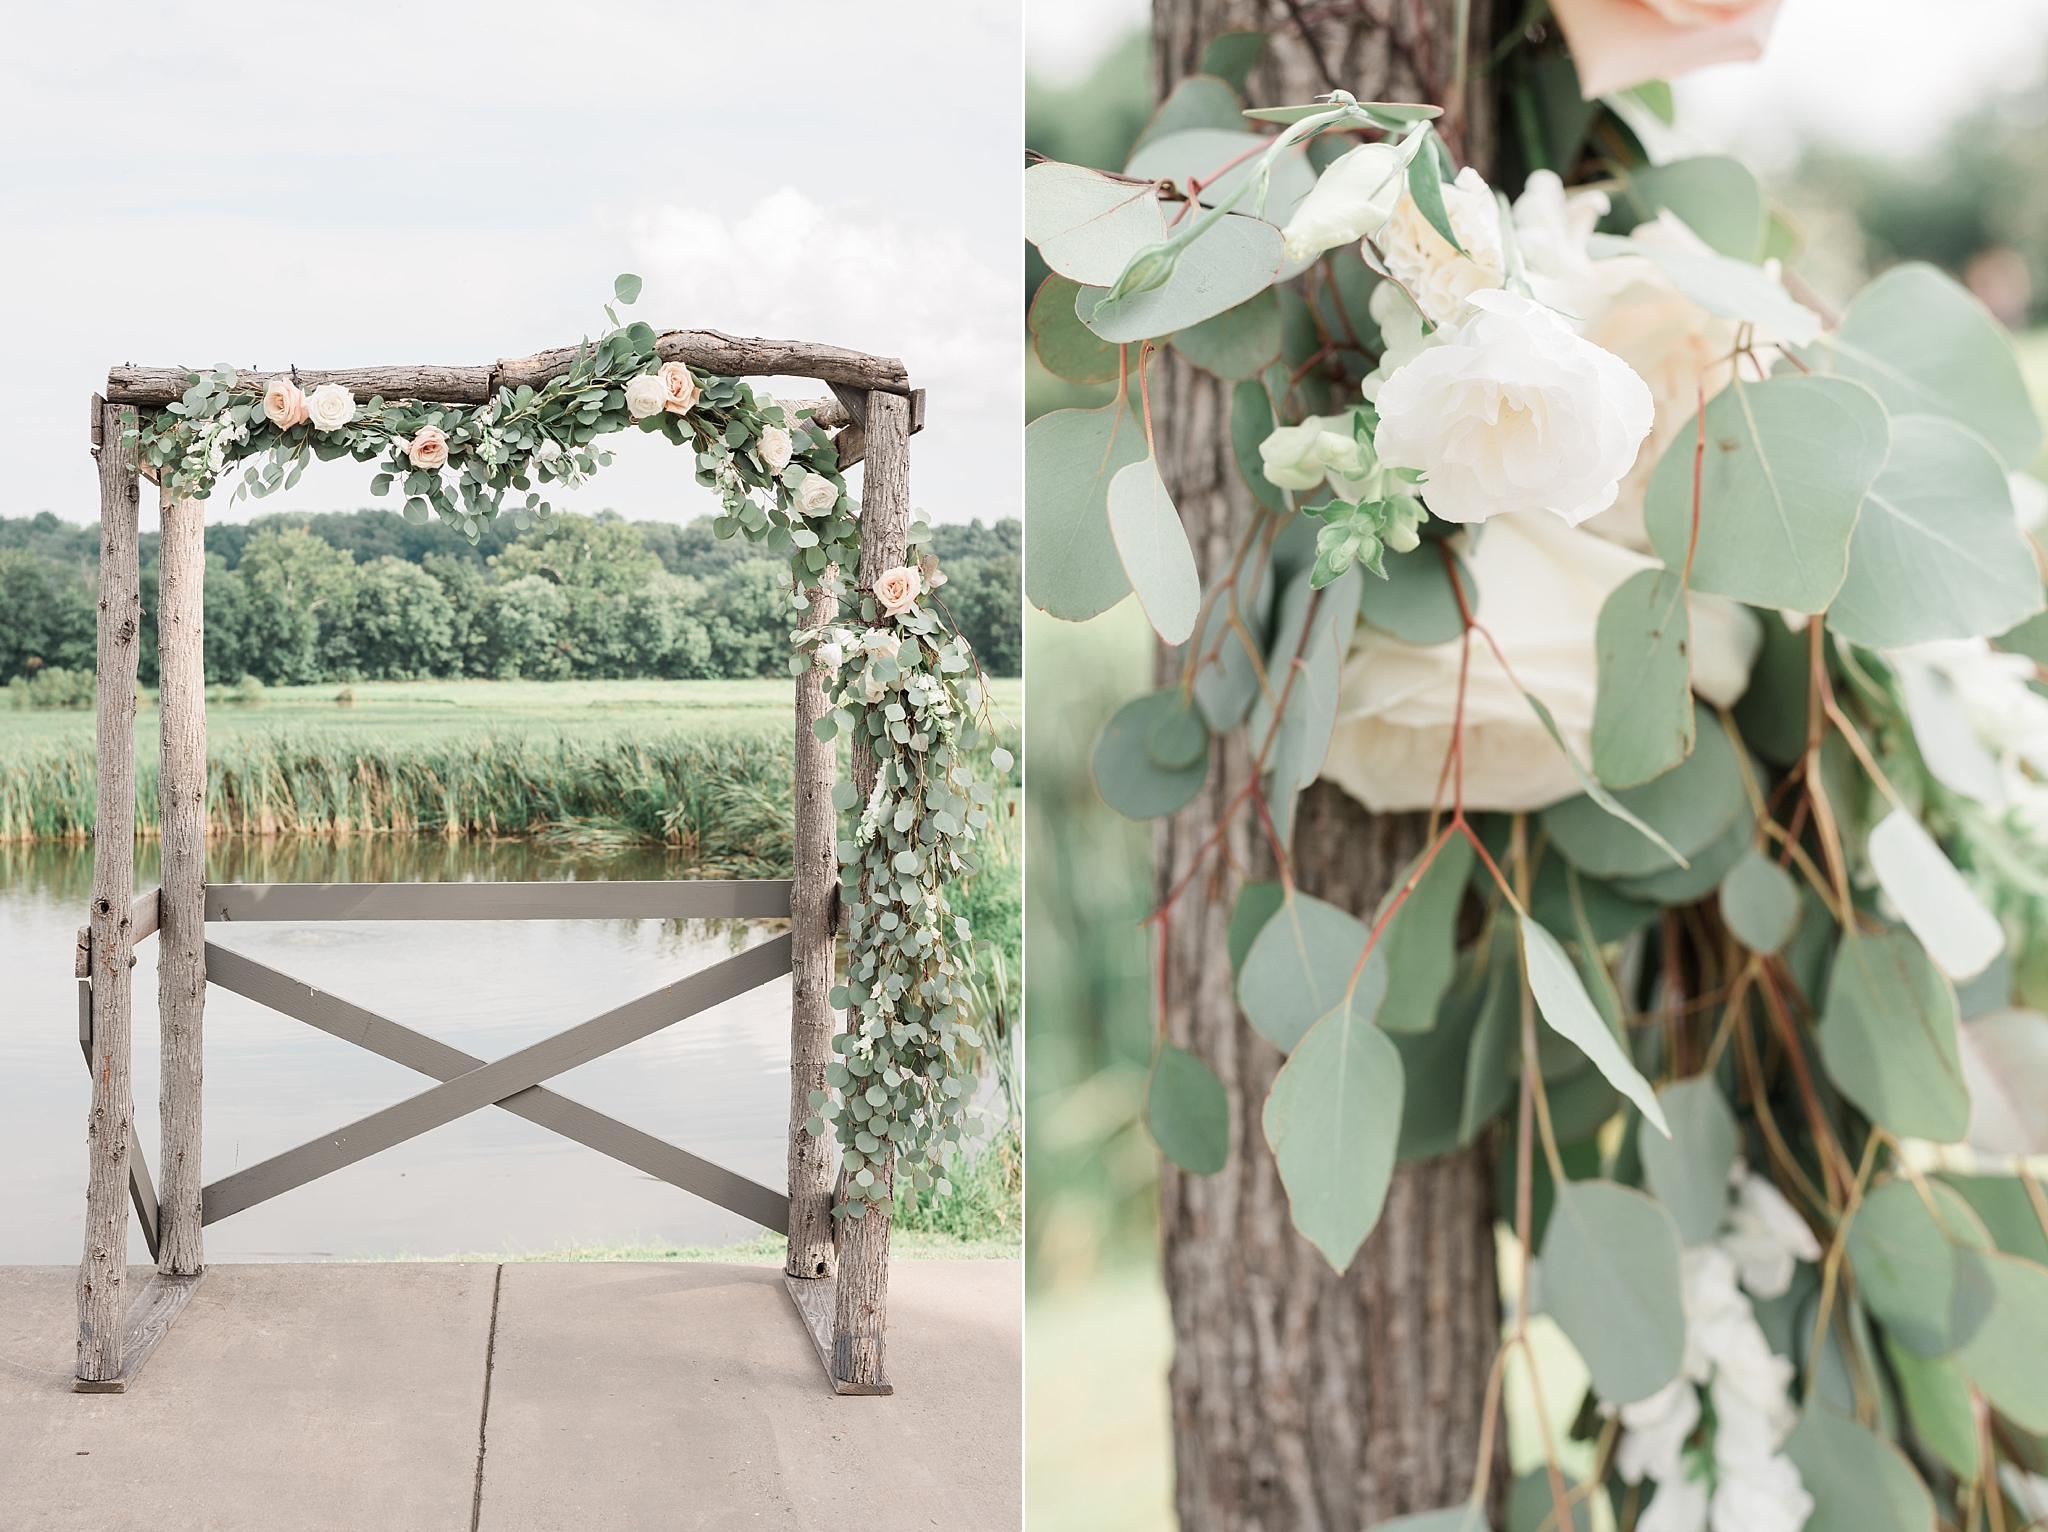 A romantic and chic wedding at Riverside on the Potomac in Leesburg, VA features a neutral palette of creams and greens with a stunning floral chandelier inside the barn!